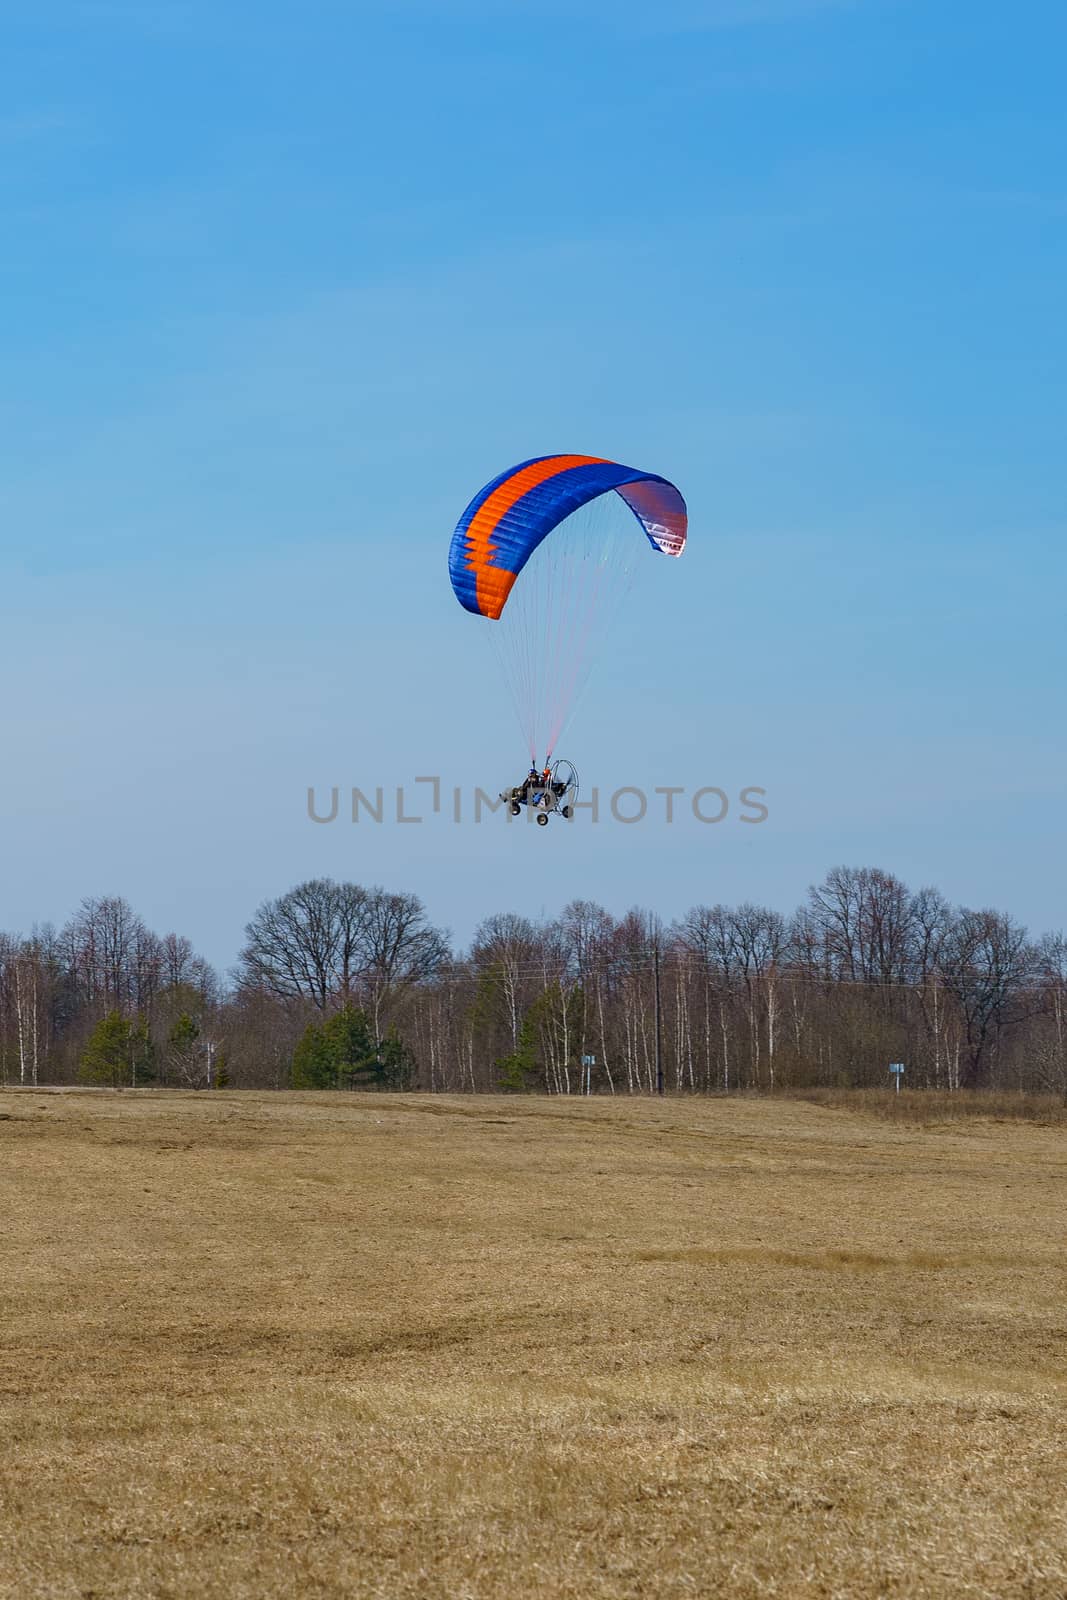 paraglider begins to take off over the field on a sunny day by VADIM